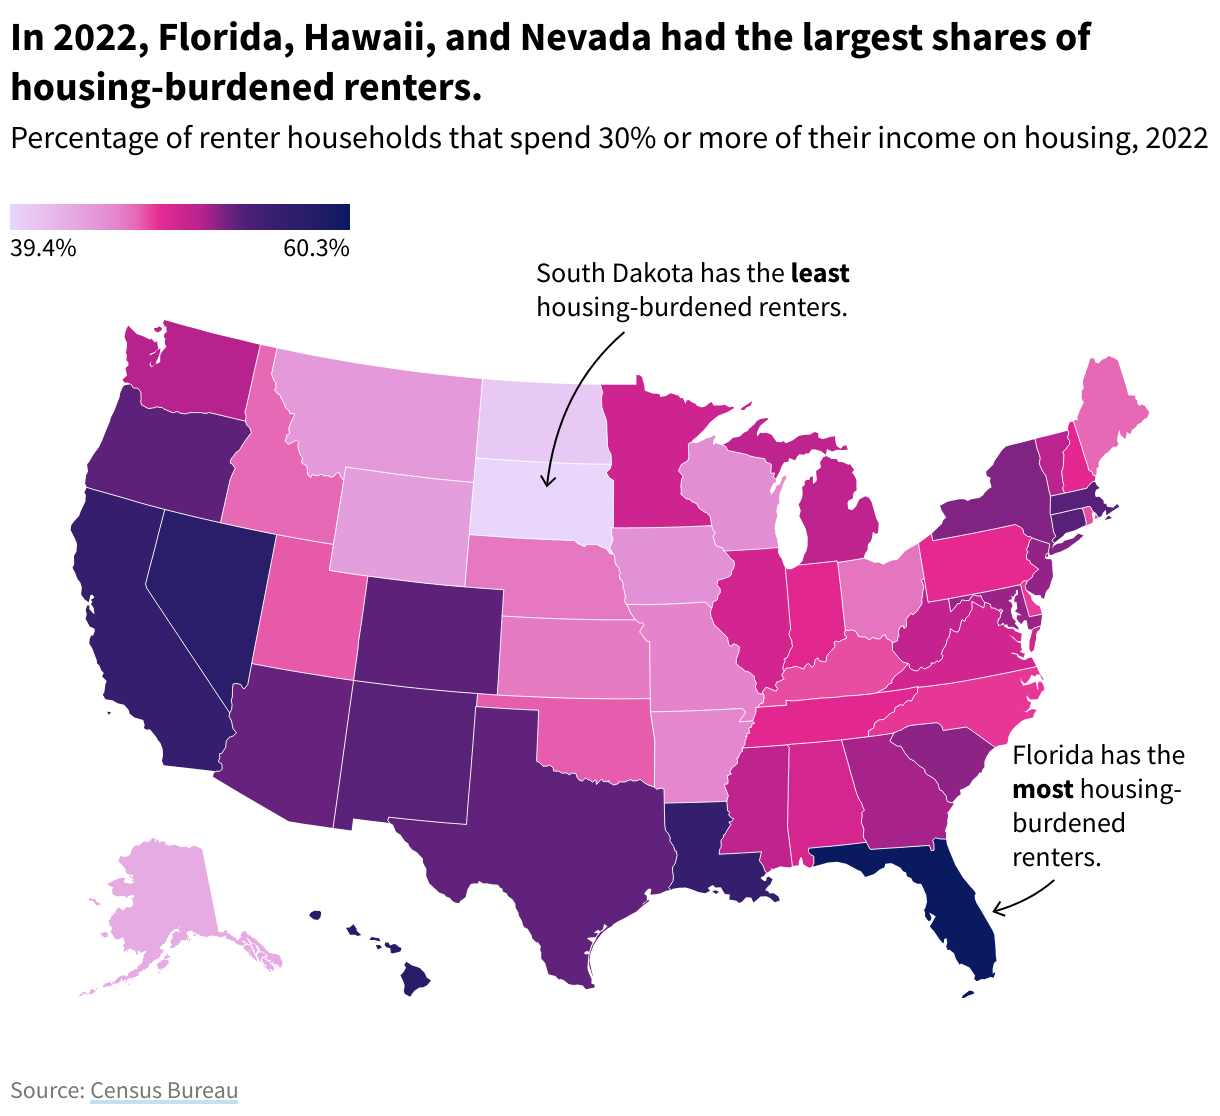 US state map showing the percentage of renter households that spent 30% or more of their income on housing in 2022.